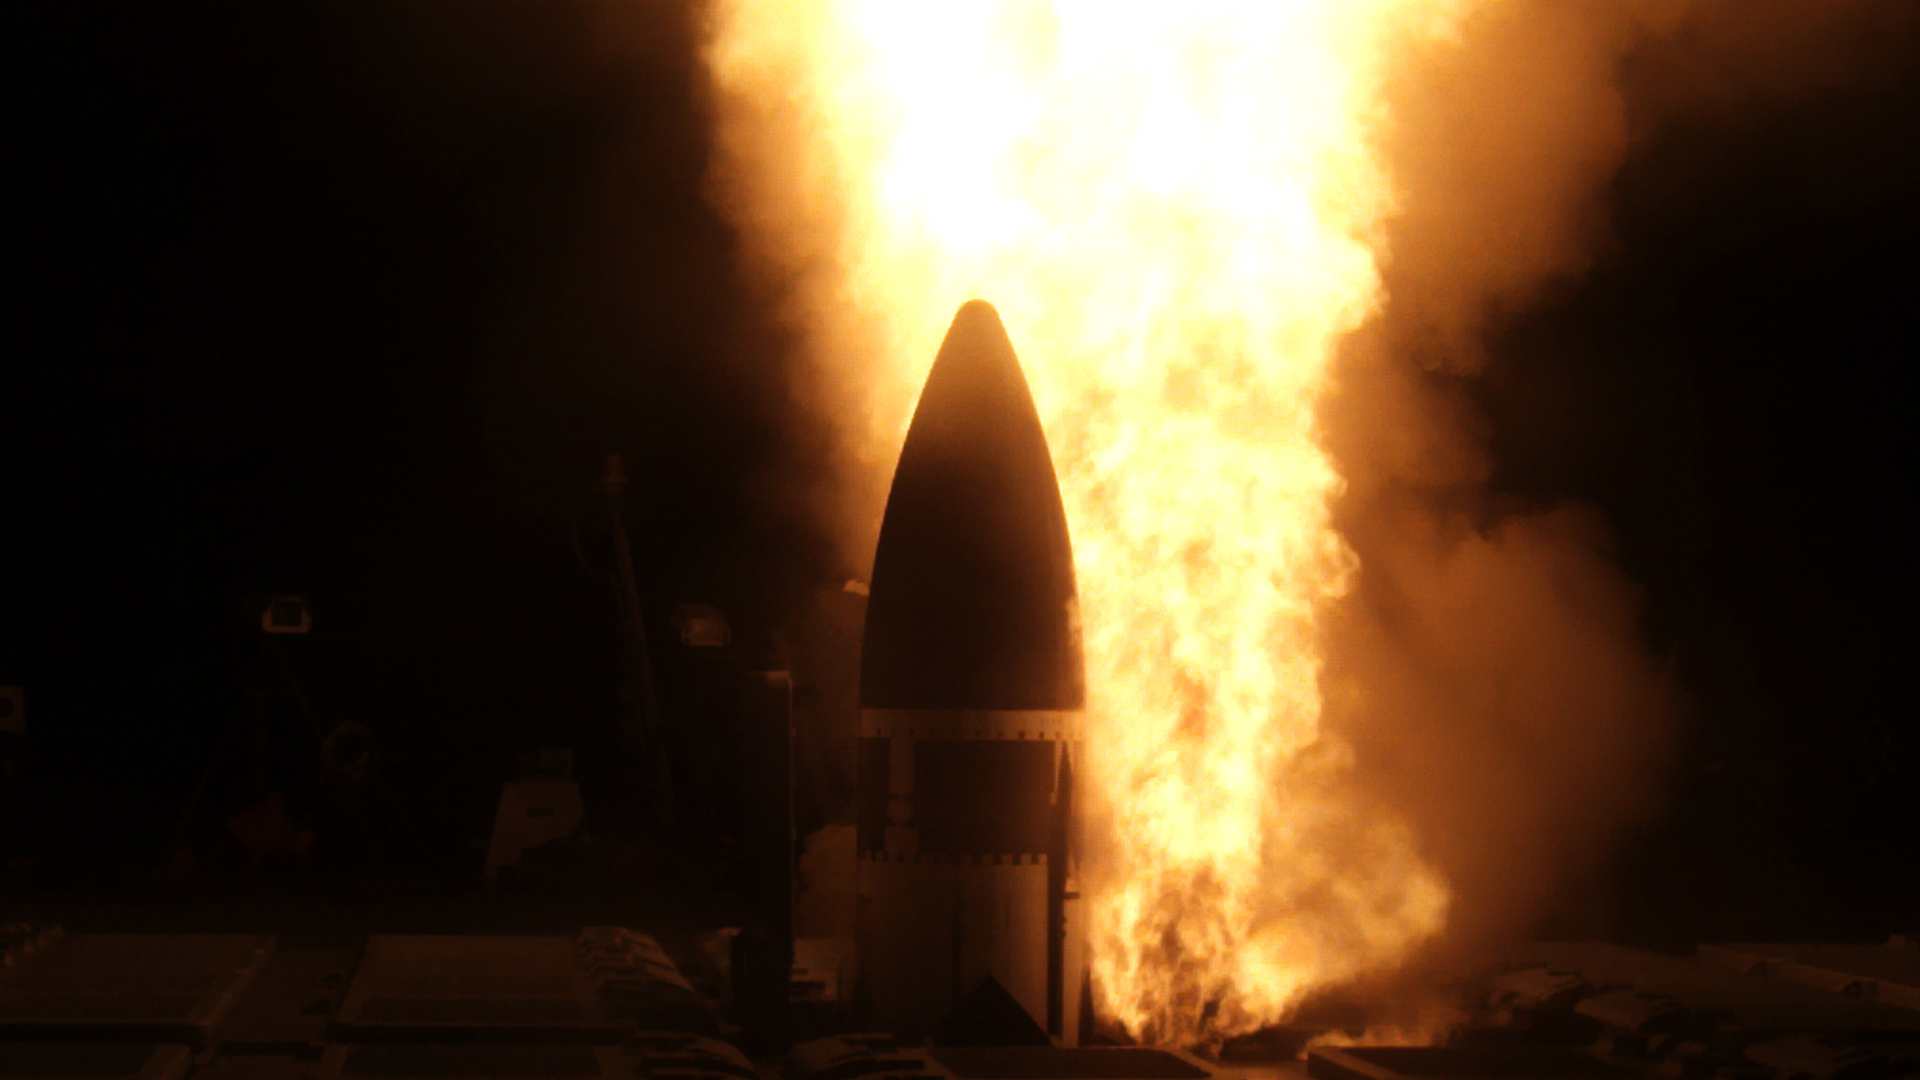 SM-3 Ballistic Missile Interceptor Used for First Time in Combat, Officials Confirm - USNI News